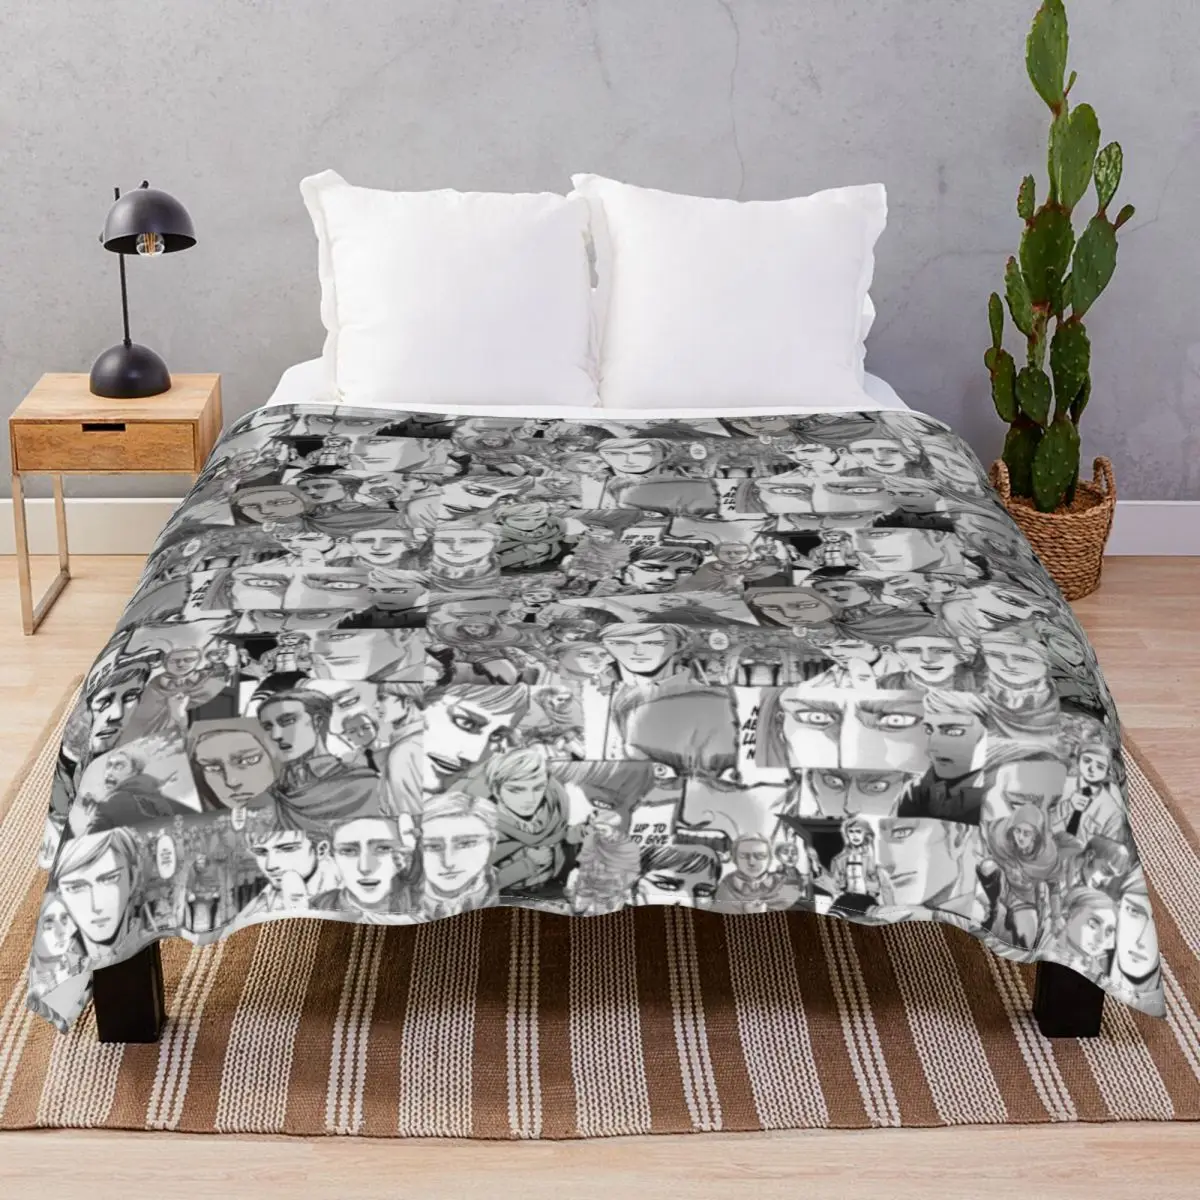 Erwin Smith Manga Panels Blanket Flannel Spring Autumn Breathable Unisex Throw Blankets for Bed Home Couch Travel Cinema